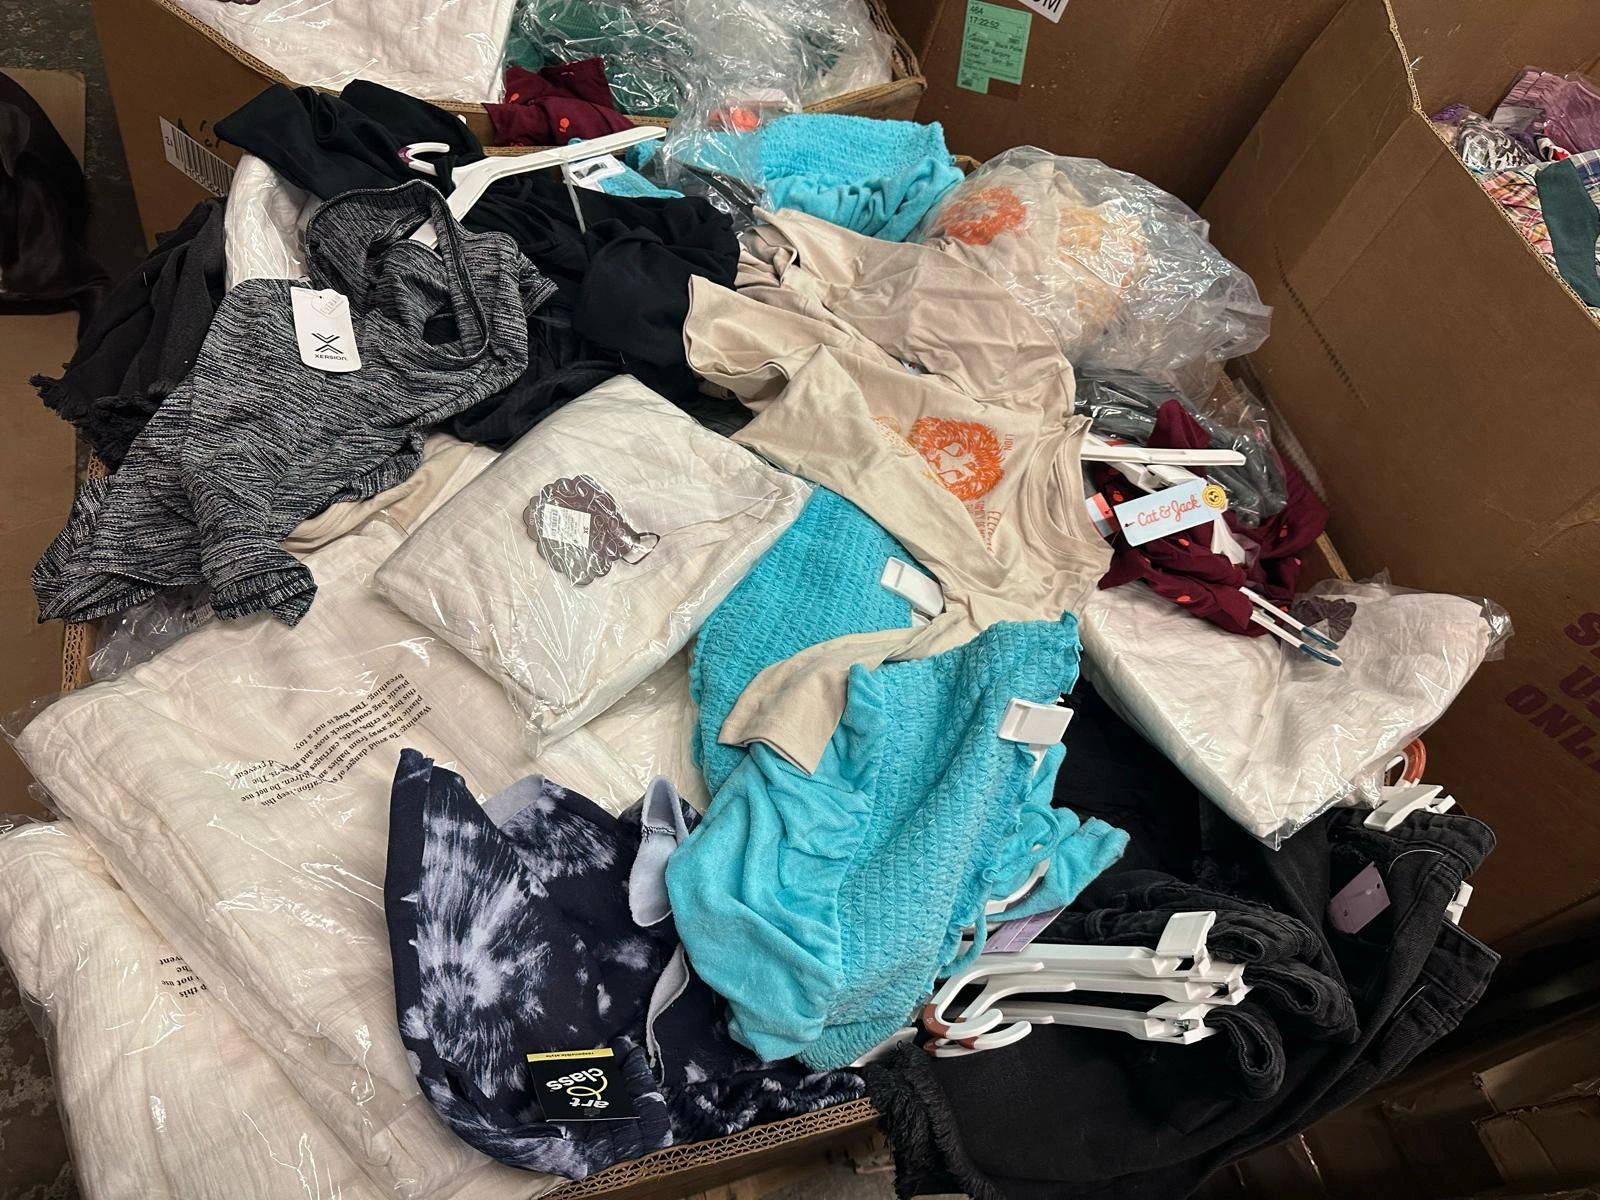 Wholesale Pallet Of 1,000 Pieces Of Target Clothing | CloseoutExplosion.com